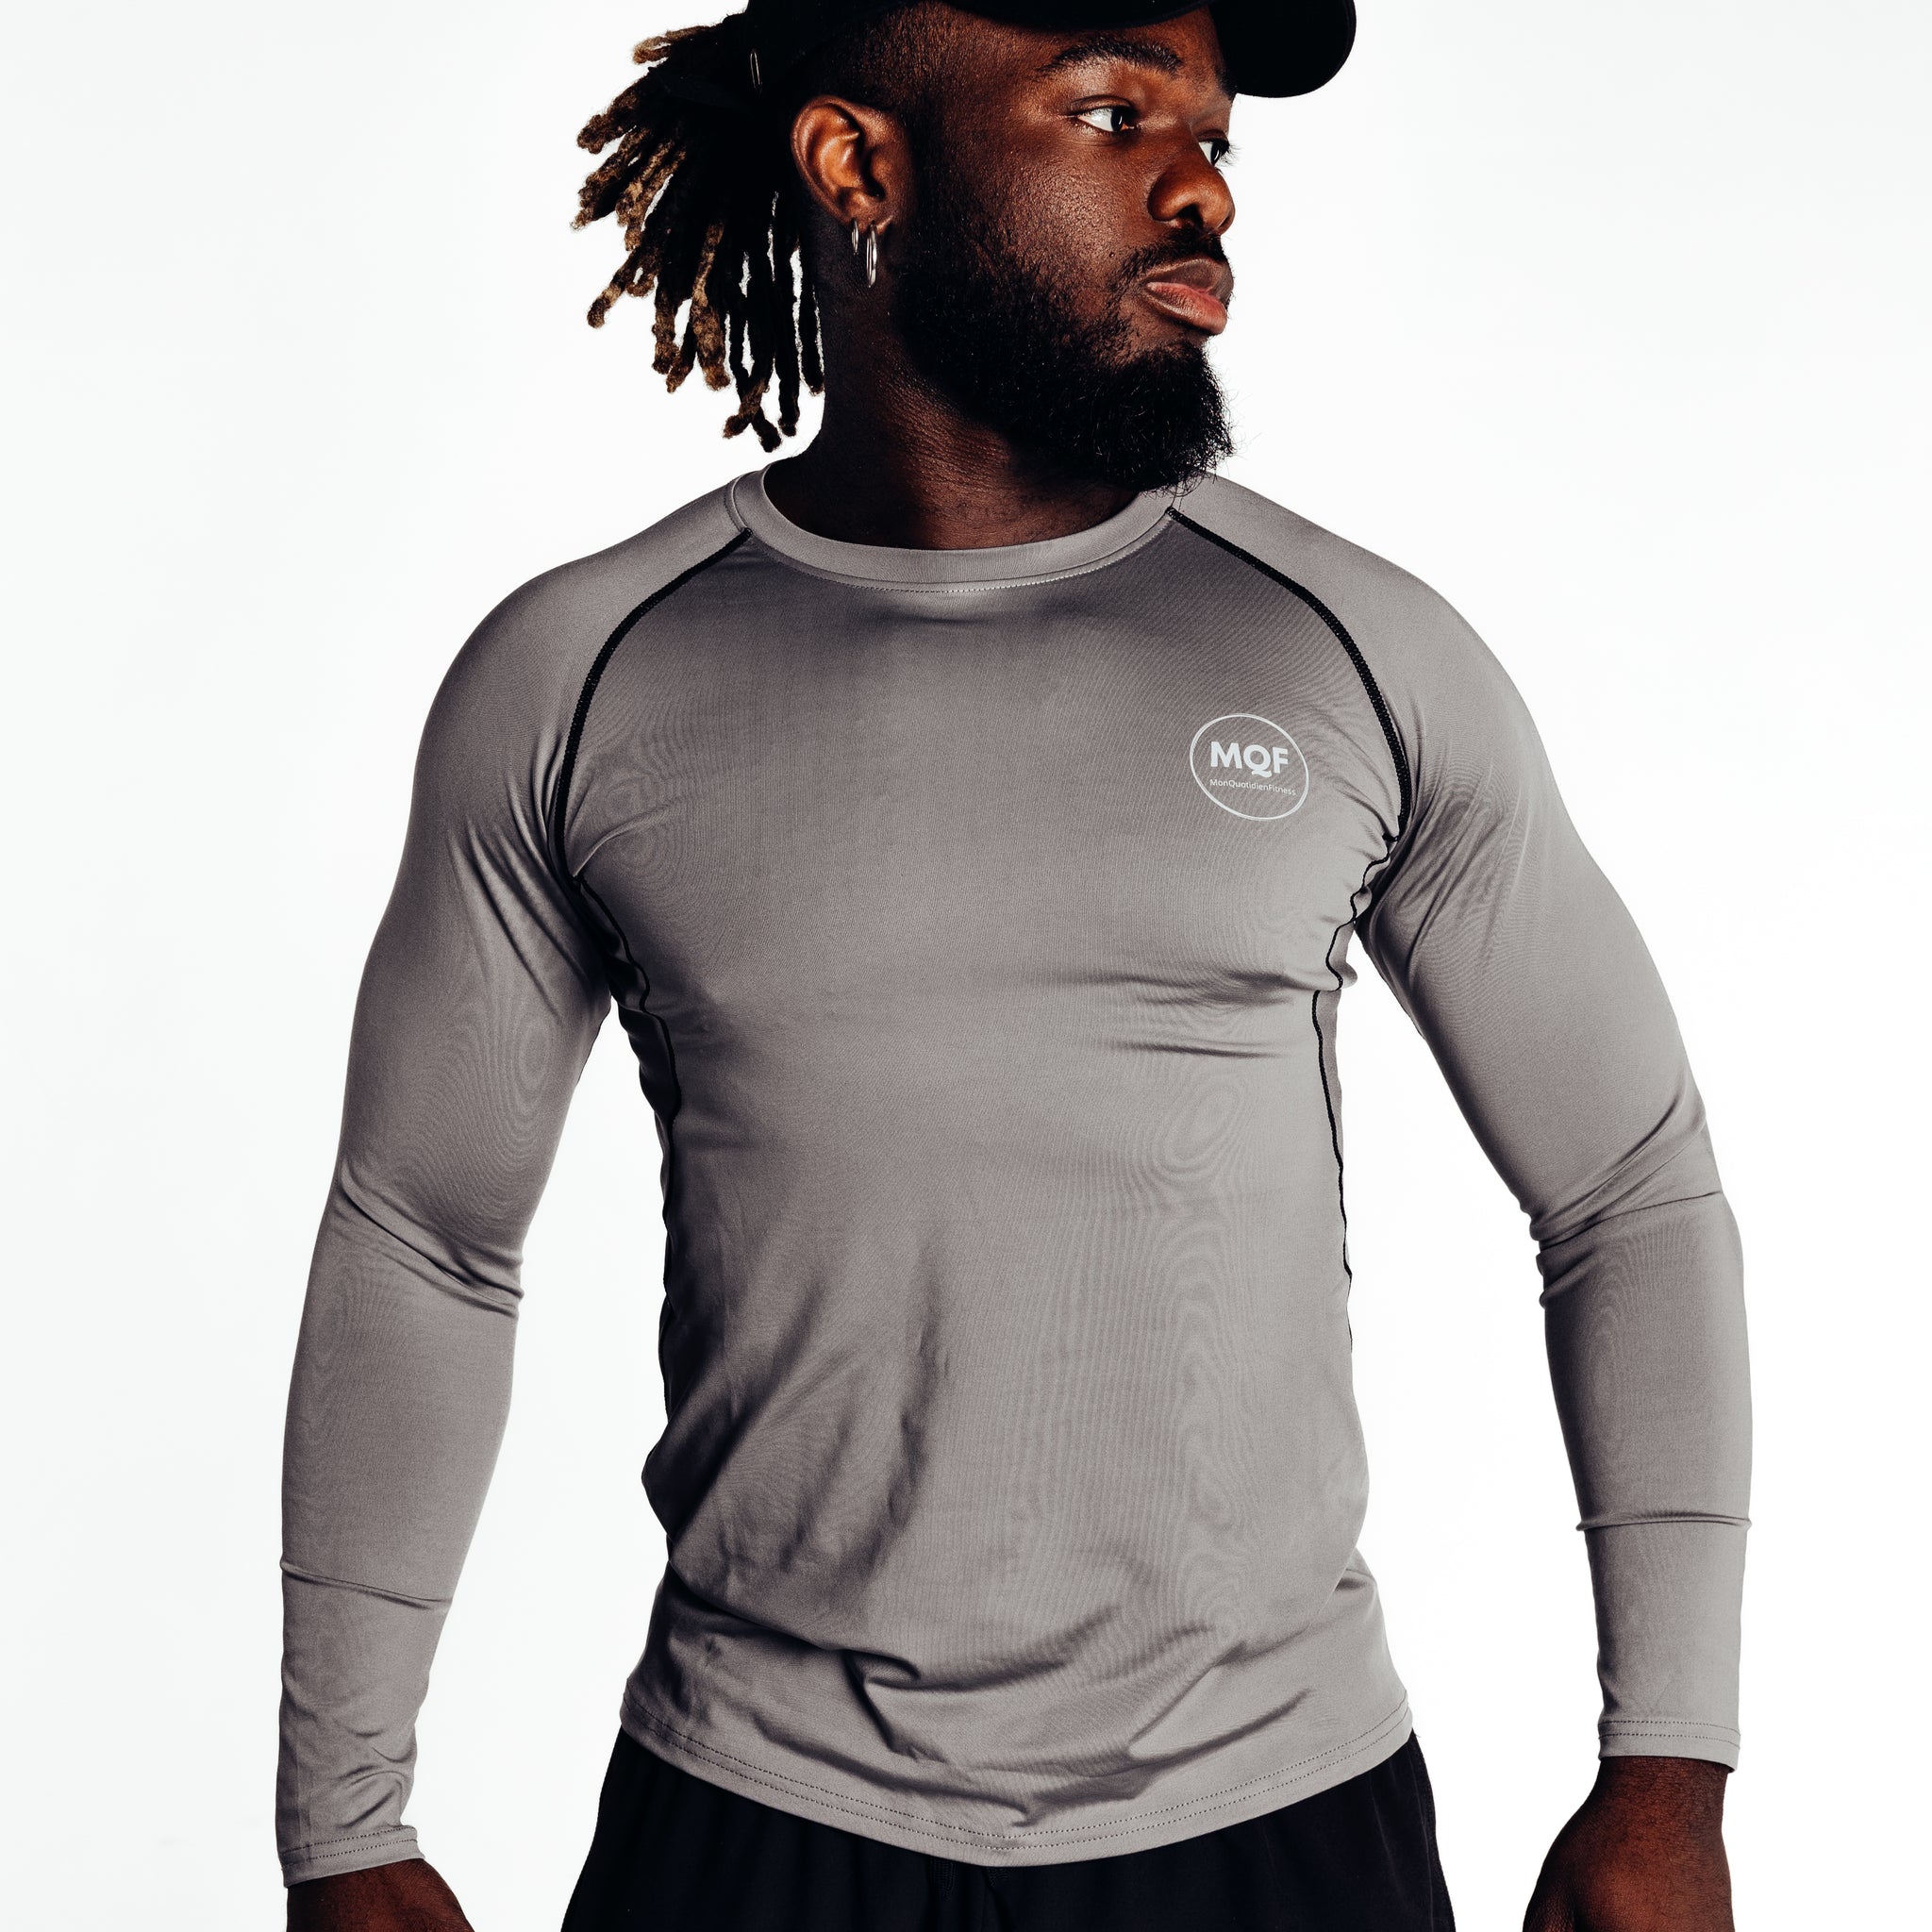 Fitness T-Shirt - Long Sleeve Sports Top - MQF Gray